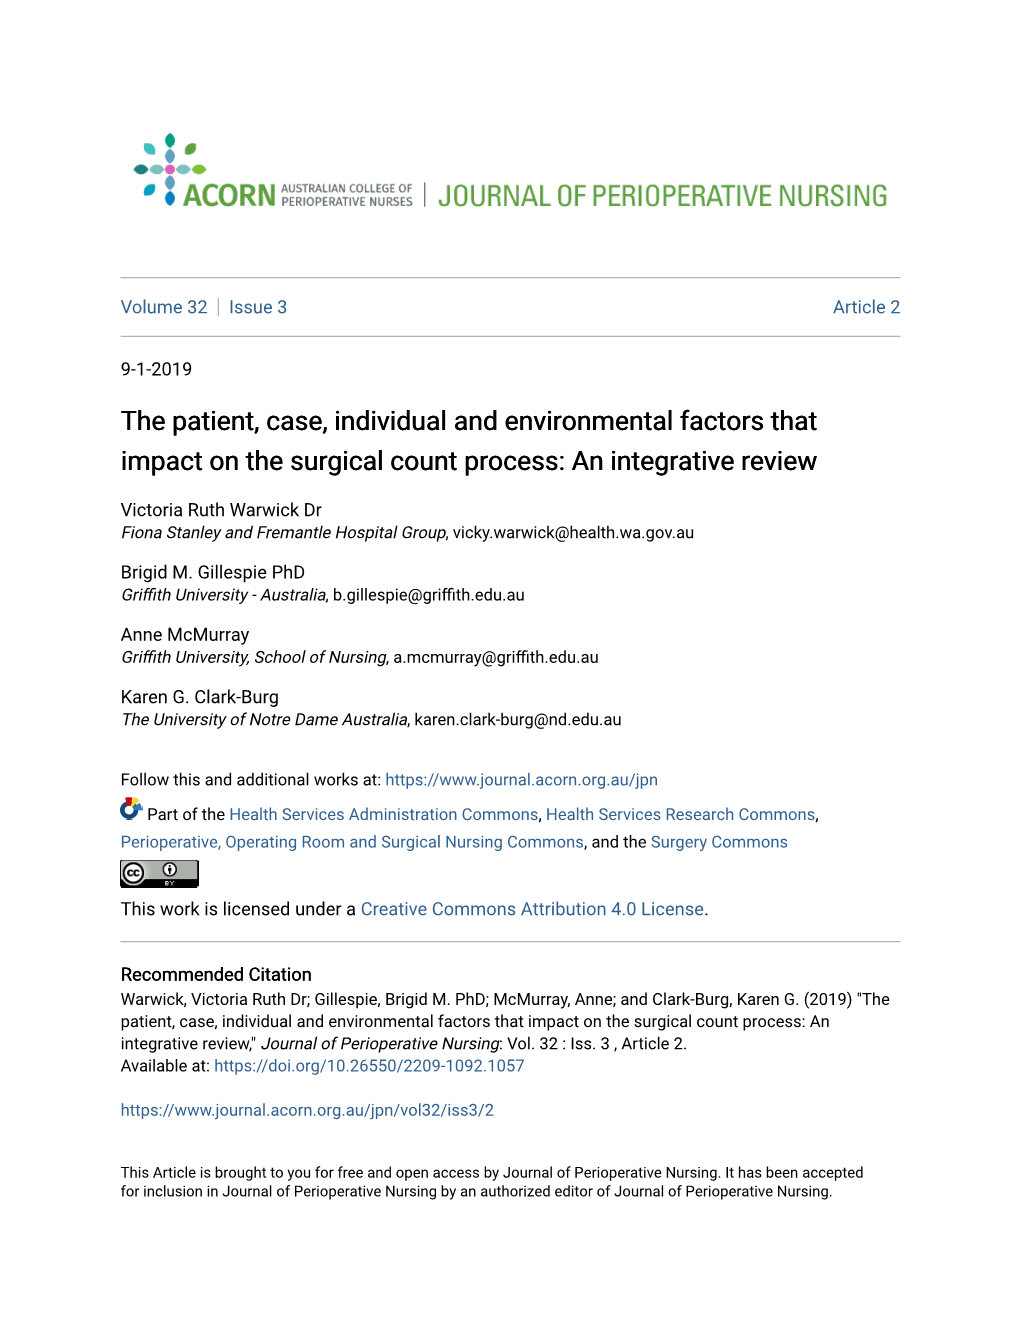 The Patient, Case, Individual and Environmental Factors That Impact on the Surgical Count Process: an Integrative Review